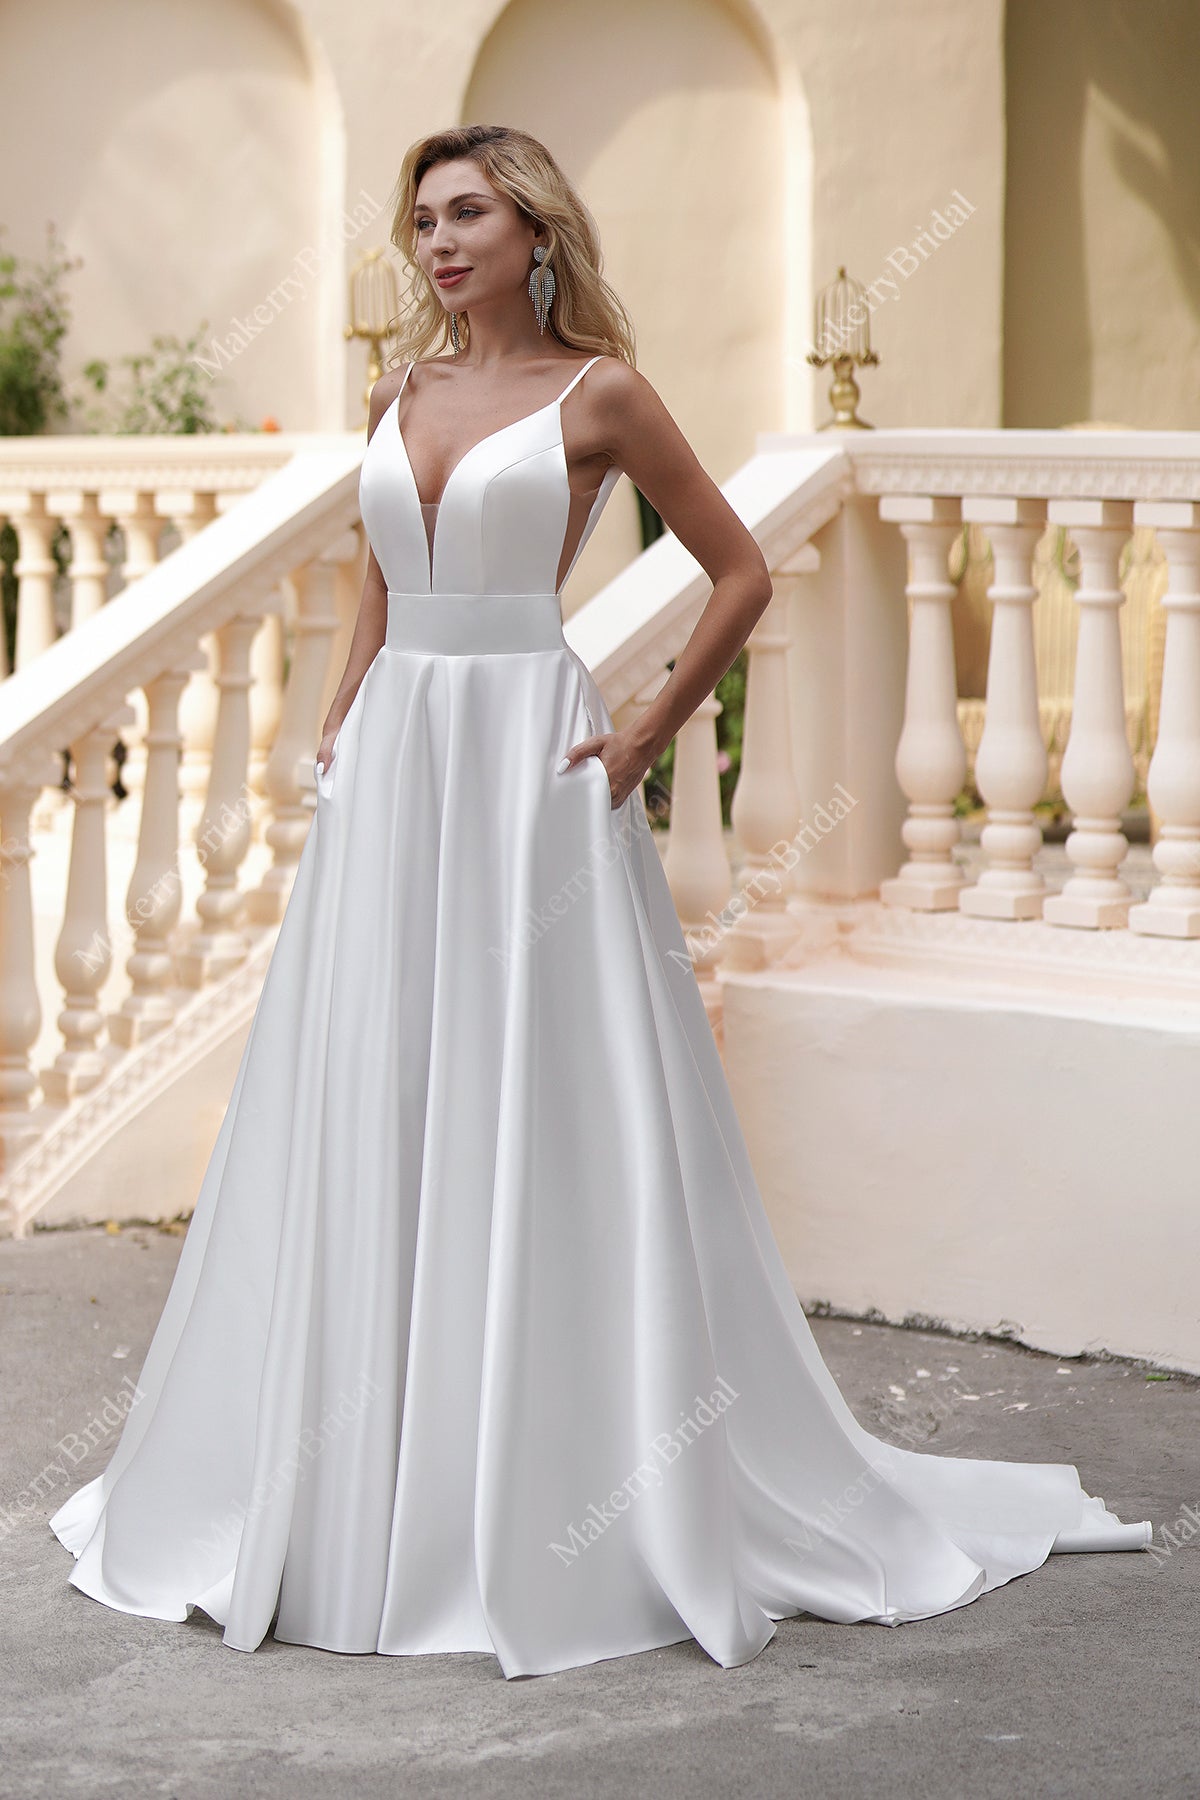 A Satin Timeless Ball Gown With Pockets